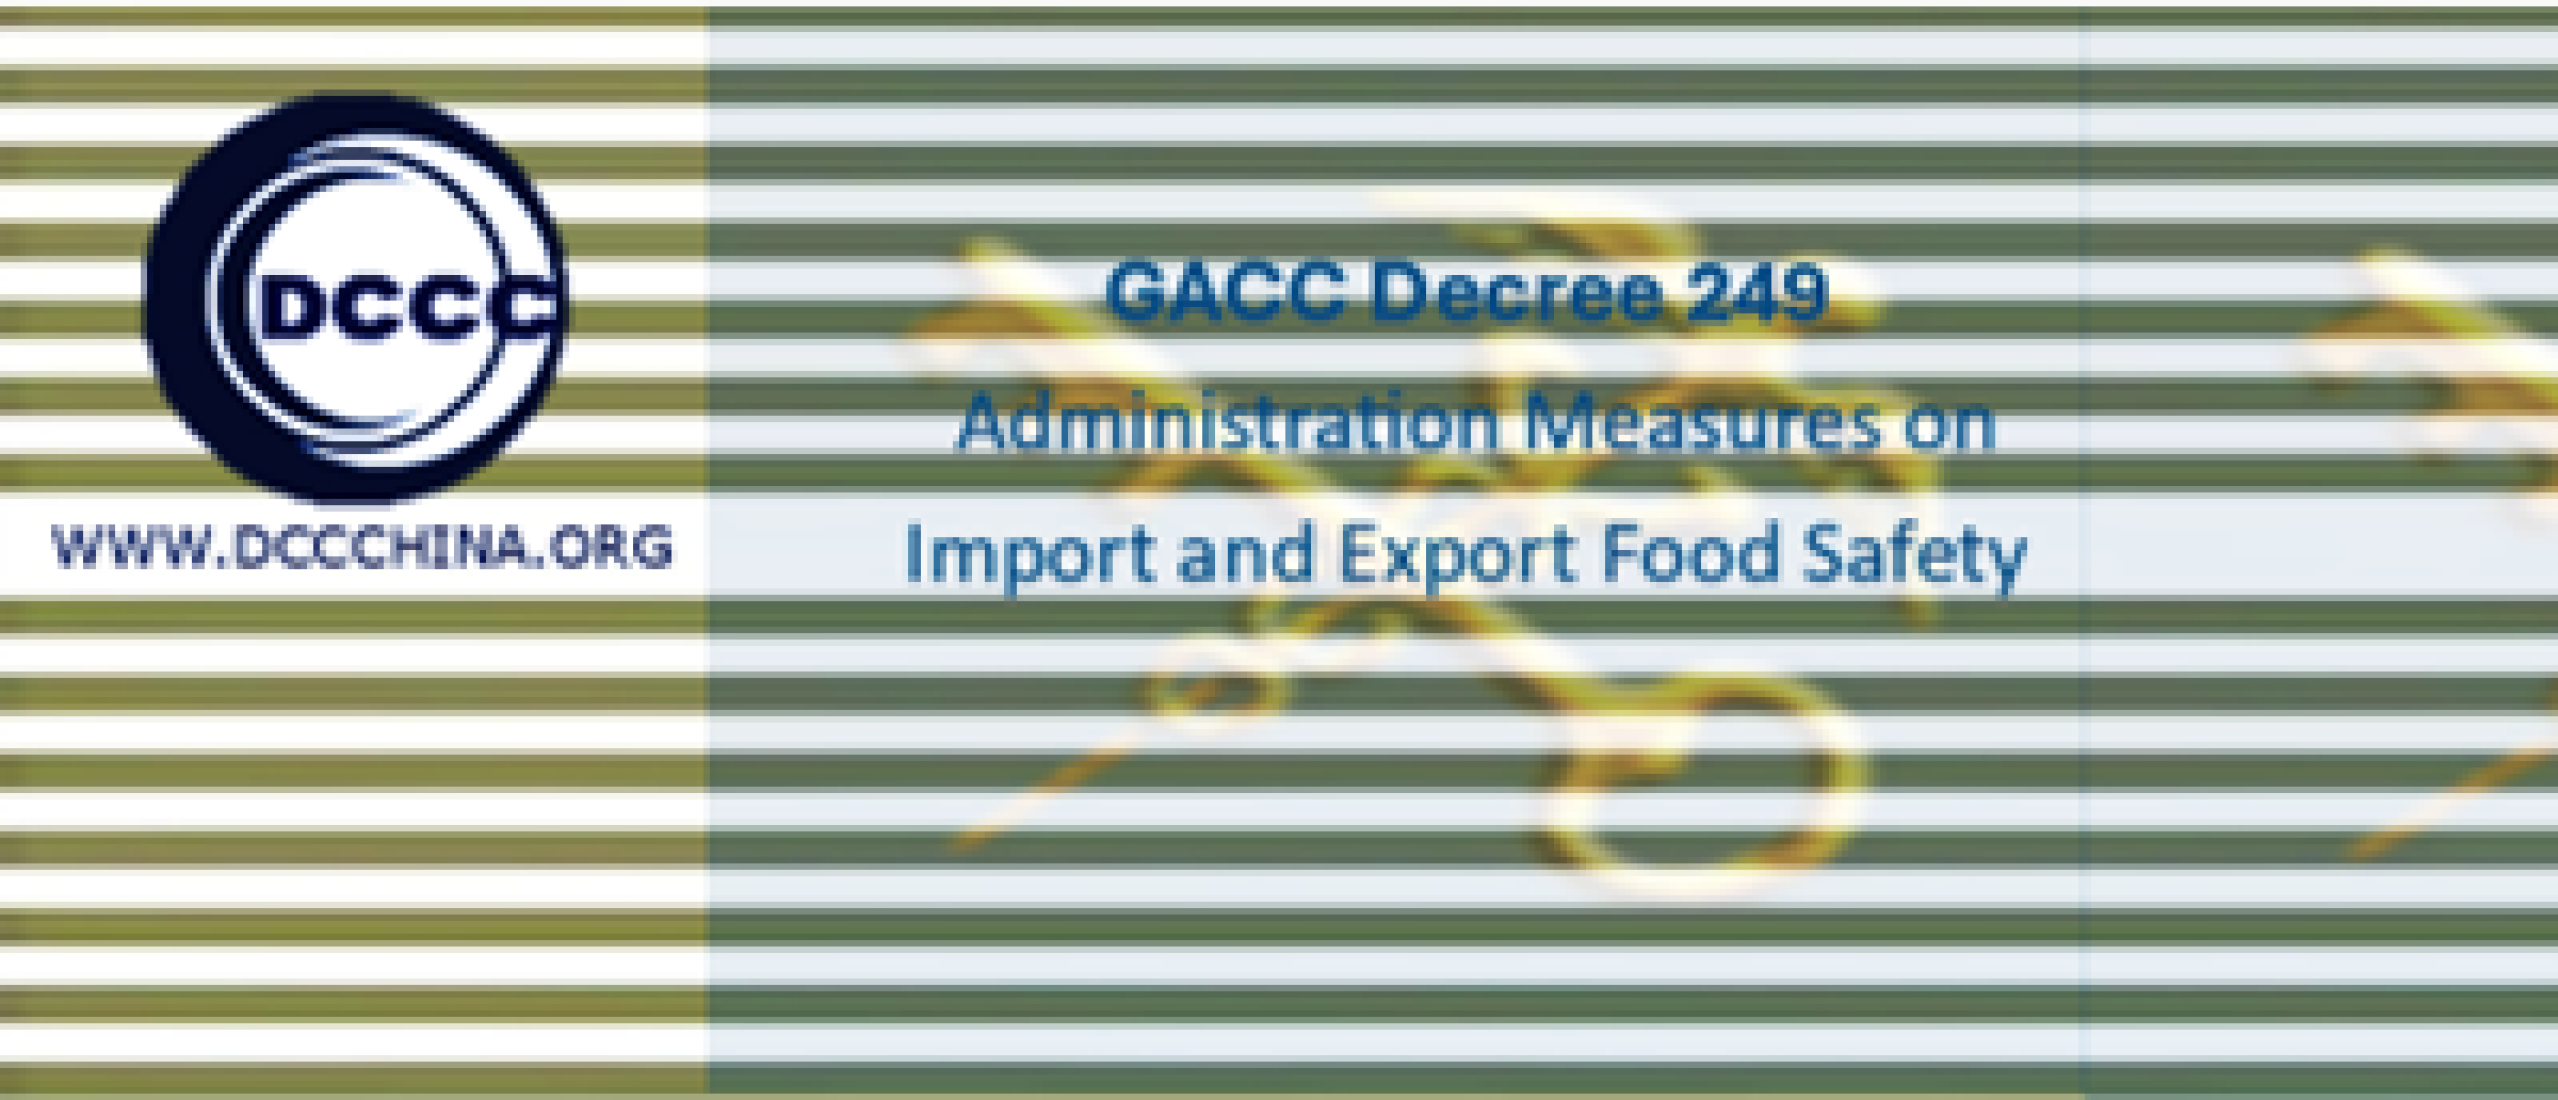 GACC Decree 249 - Administration measures on import and export food safety